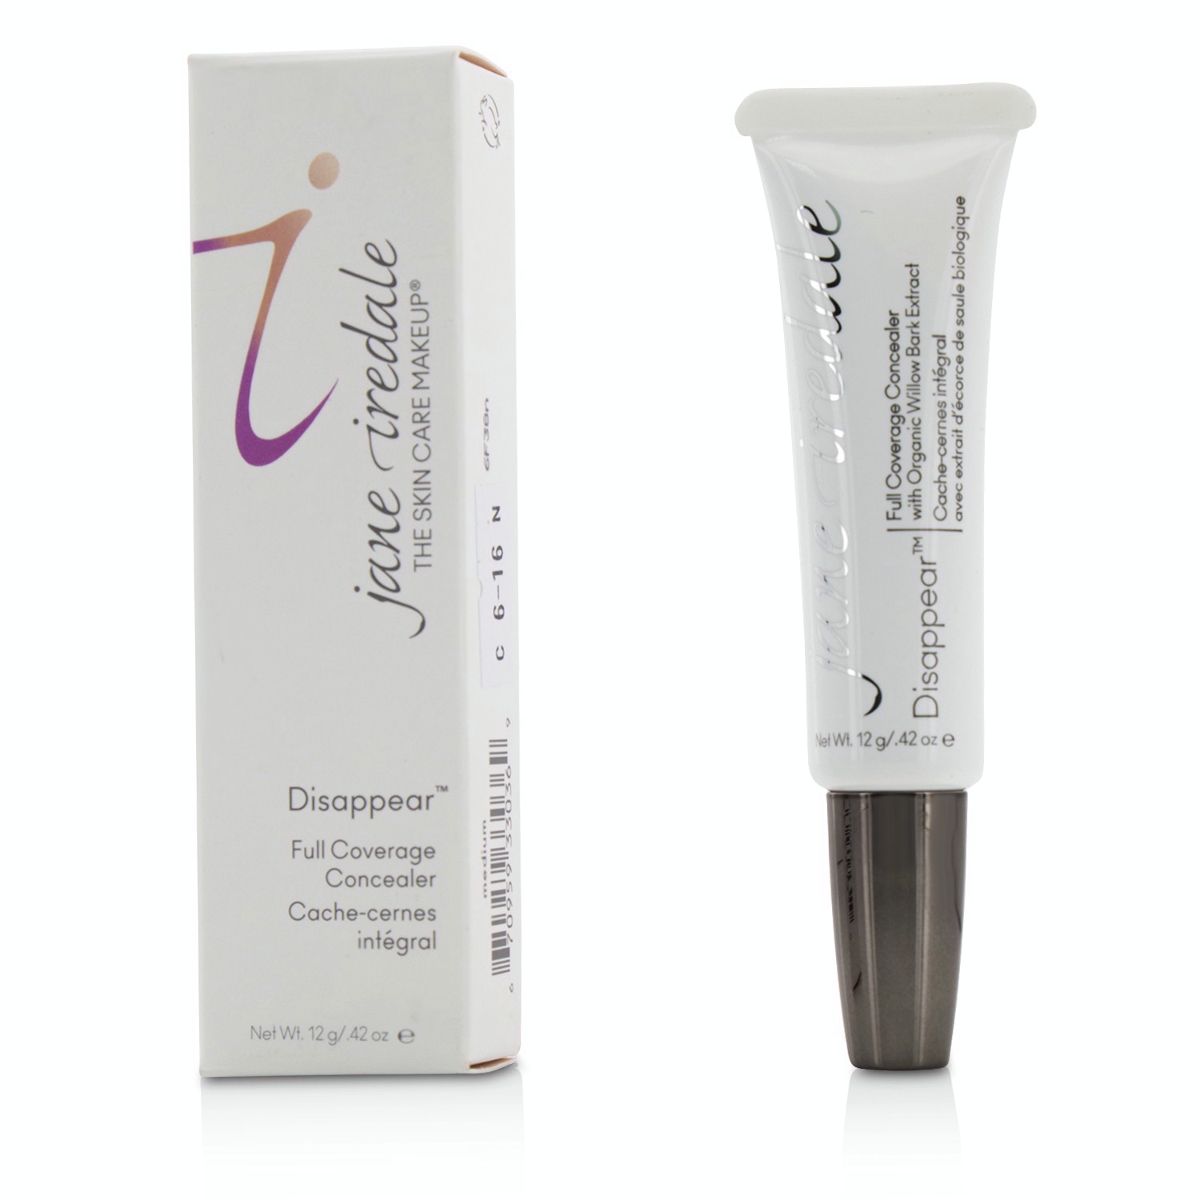 Disappear Full Coverage Concealer - Medium Jane Iredale Image